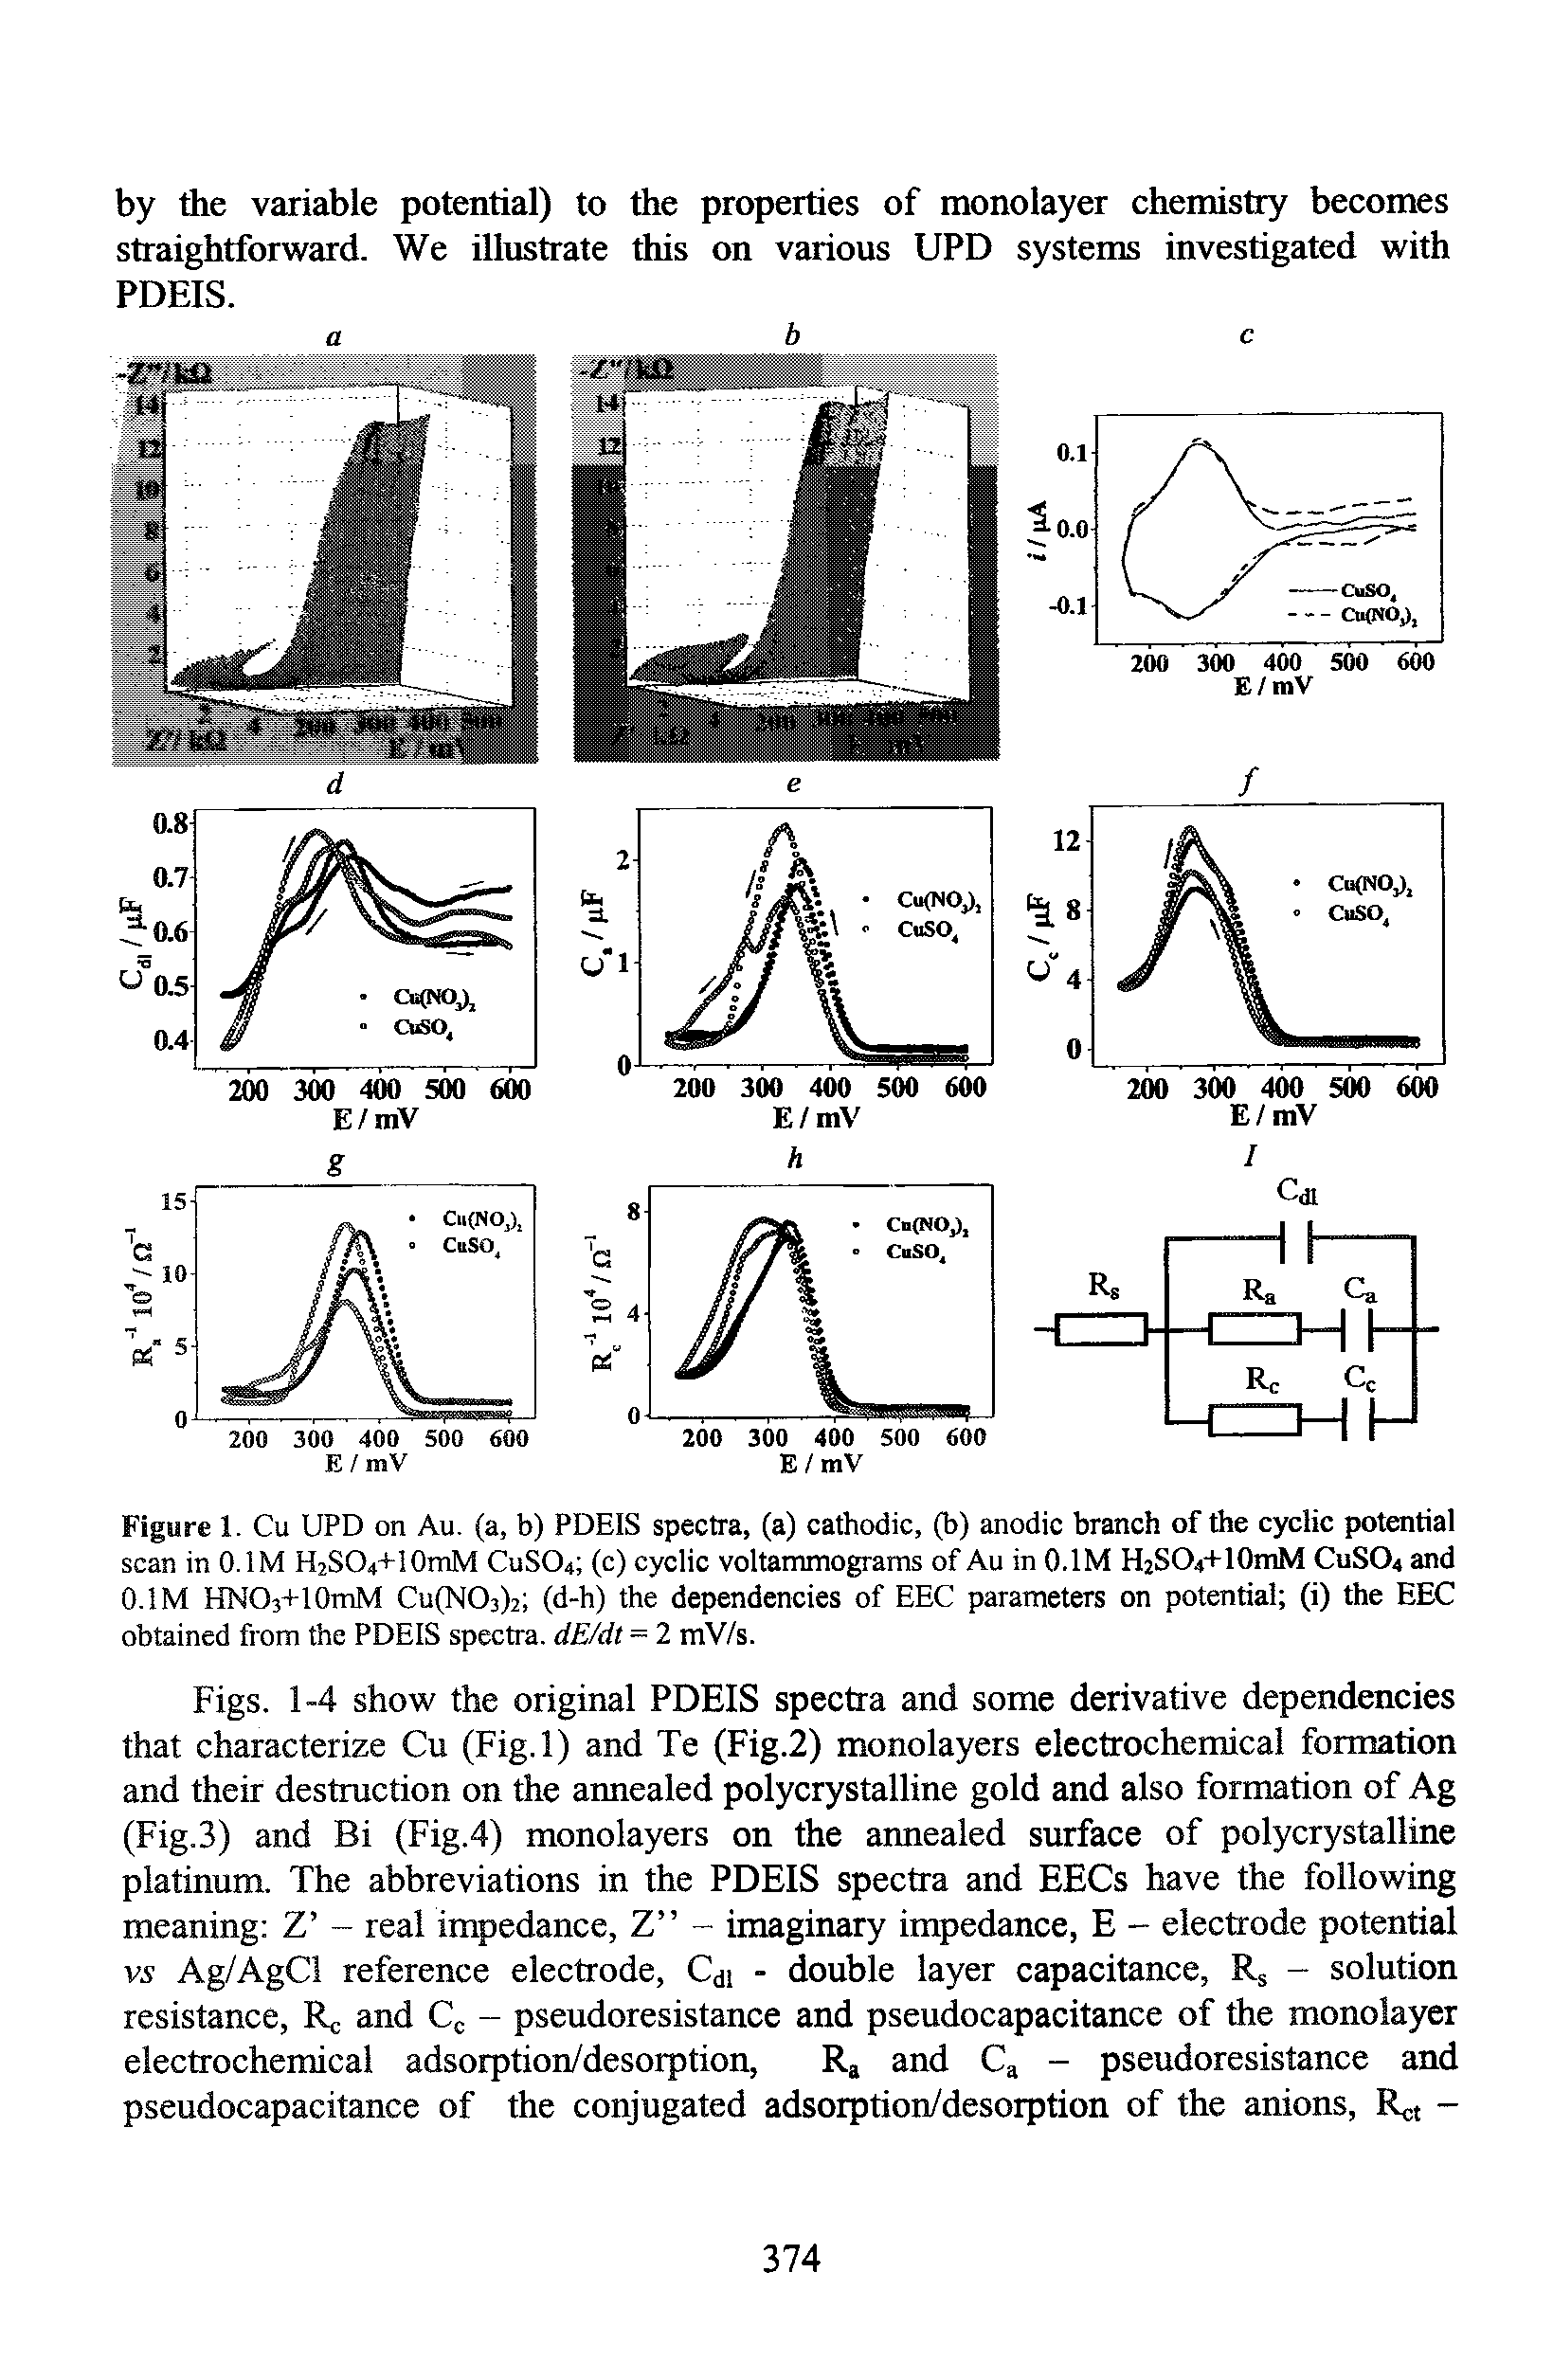 Figure 1. Cu UPD on Au. (a, b) PDEIS spectra, (a) cathodic, (b) anodic branch of the cyclic potential scan in O.IM H2SO4+10mM CUSO4 (c) cyclic voltammograms of Au in O.IM H2SO4+10mM CuSOa and O.IM HNOs+lOmM Cu(N03)2 (d-h) the dependencies of EEC parameters on potential (i) the EEC obtained from the PDEIS spectra. dE/dt = 2 mV/s.